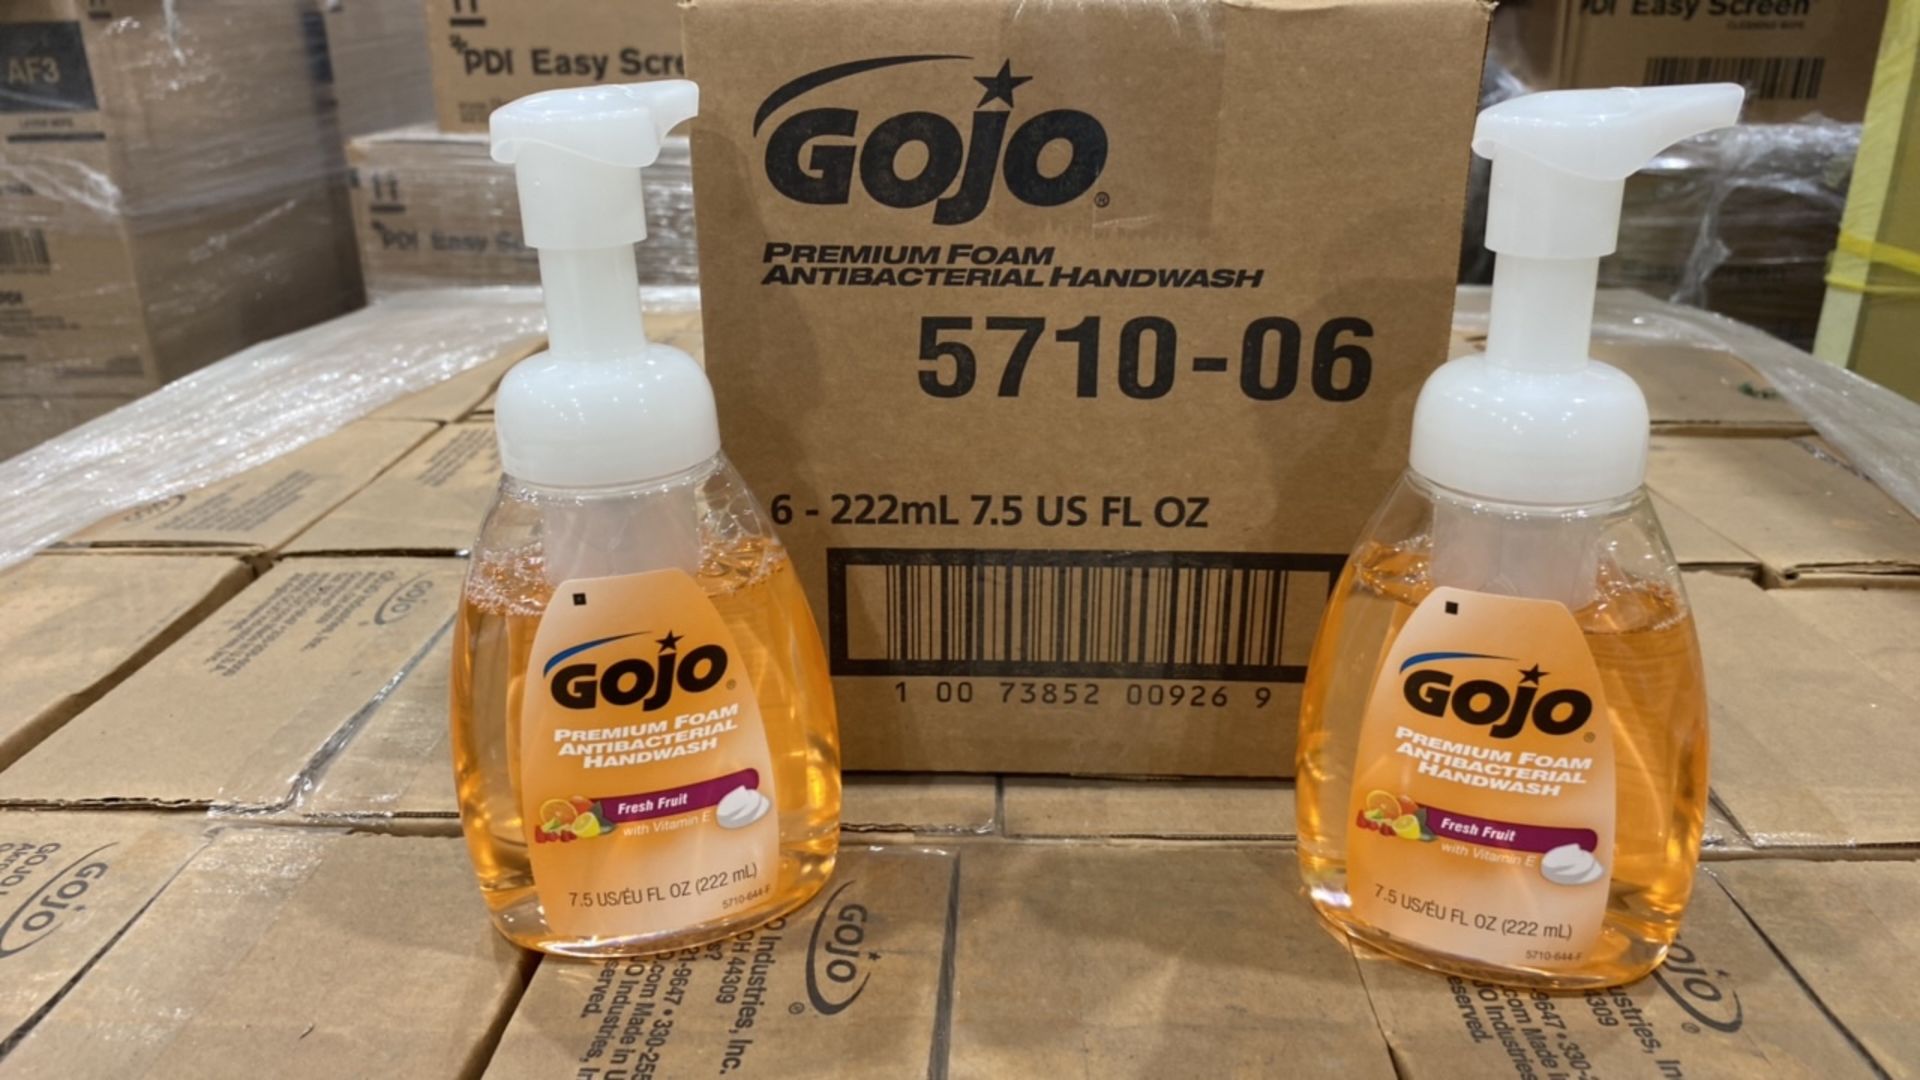 GOJO 5710-06 7 OZ. ANTIBACTERIAL FOAM HAND WASHES QTY:146 CASES/ 6 PER CASE